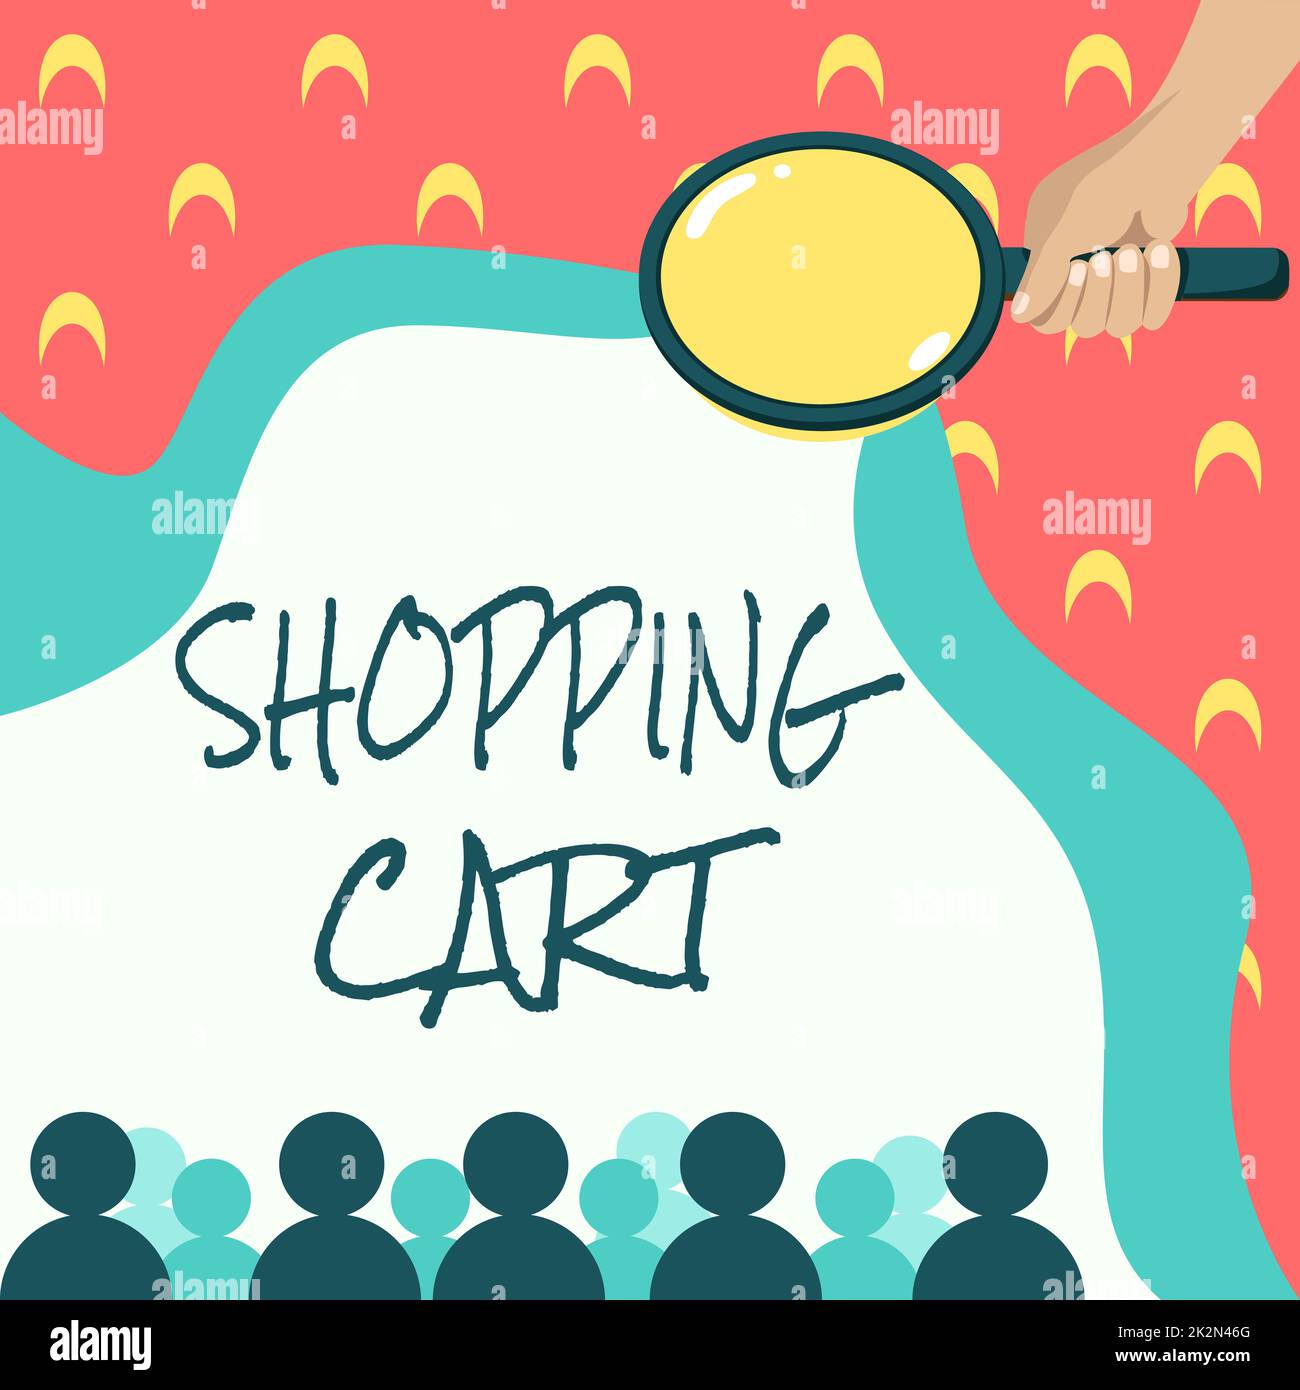 Text showing inspiration Shopping Cart. Business overview Case Trolley Carrying Groceries and Merchandise Hand Holding Magnifying Glass Examining Socio Economic Structure. Stock Photo